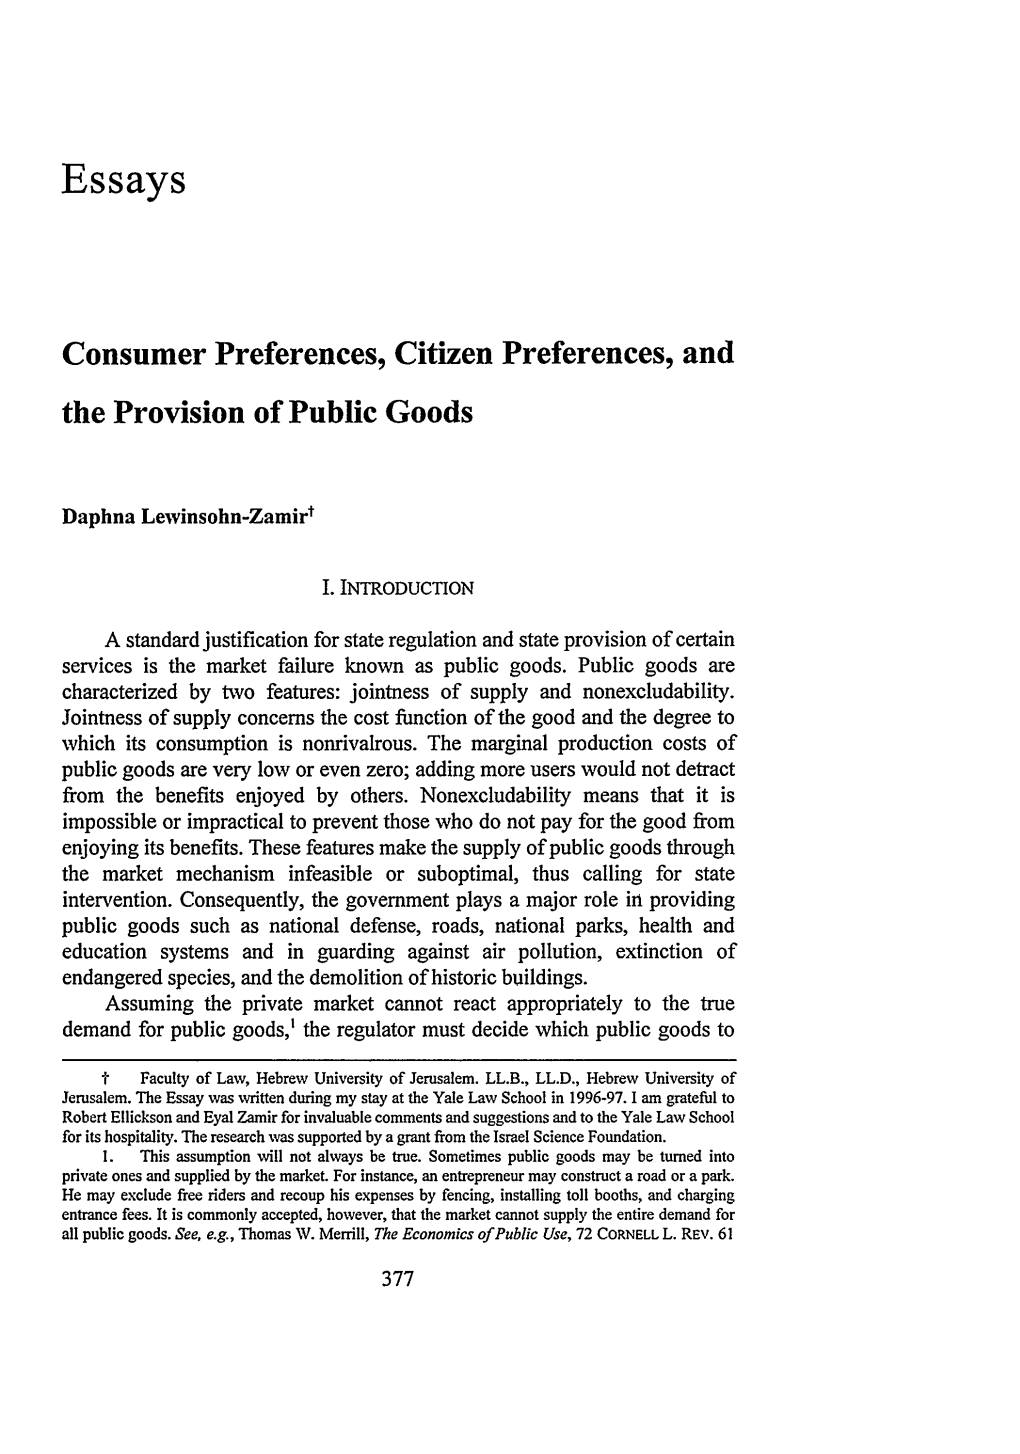 Consumer Preferences, Citizen Preferences, and the Provision of Public Goods